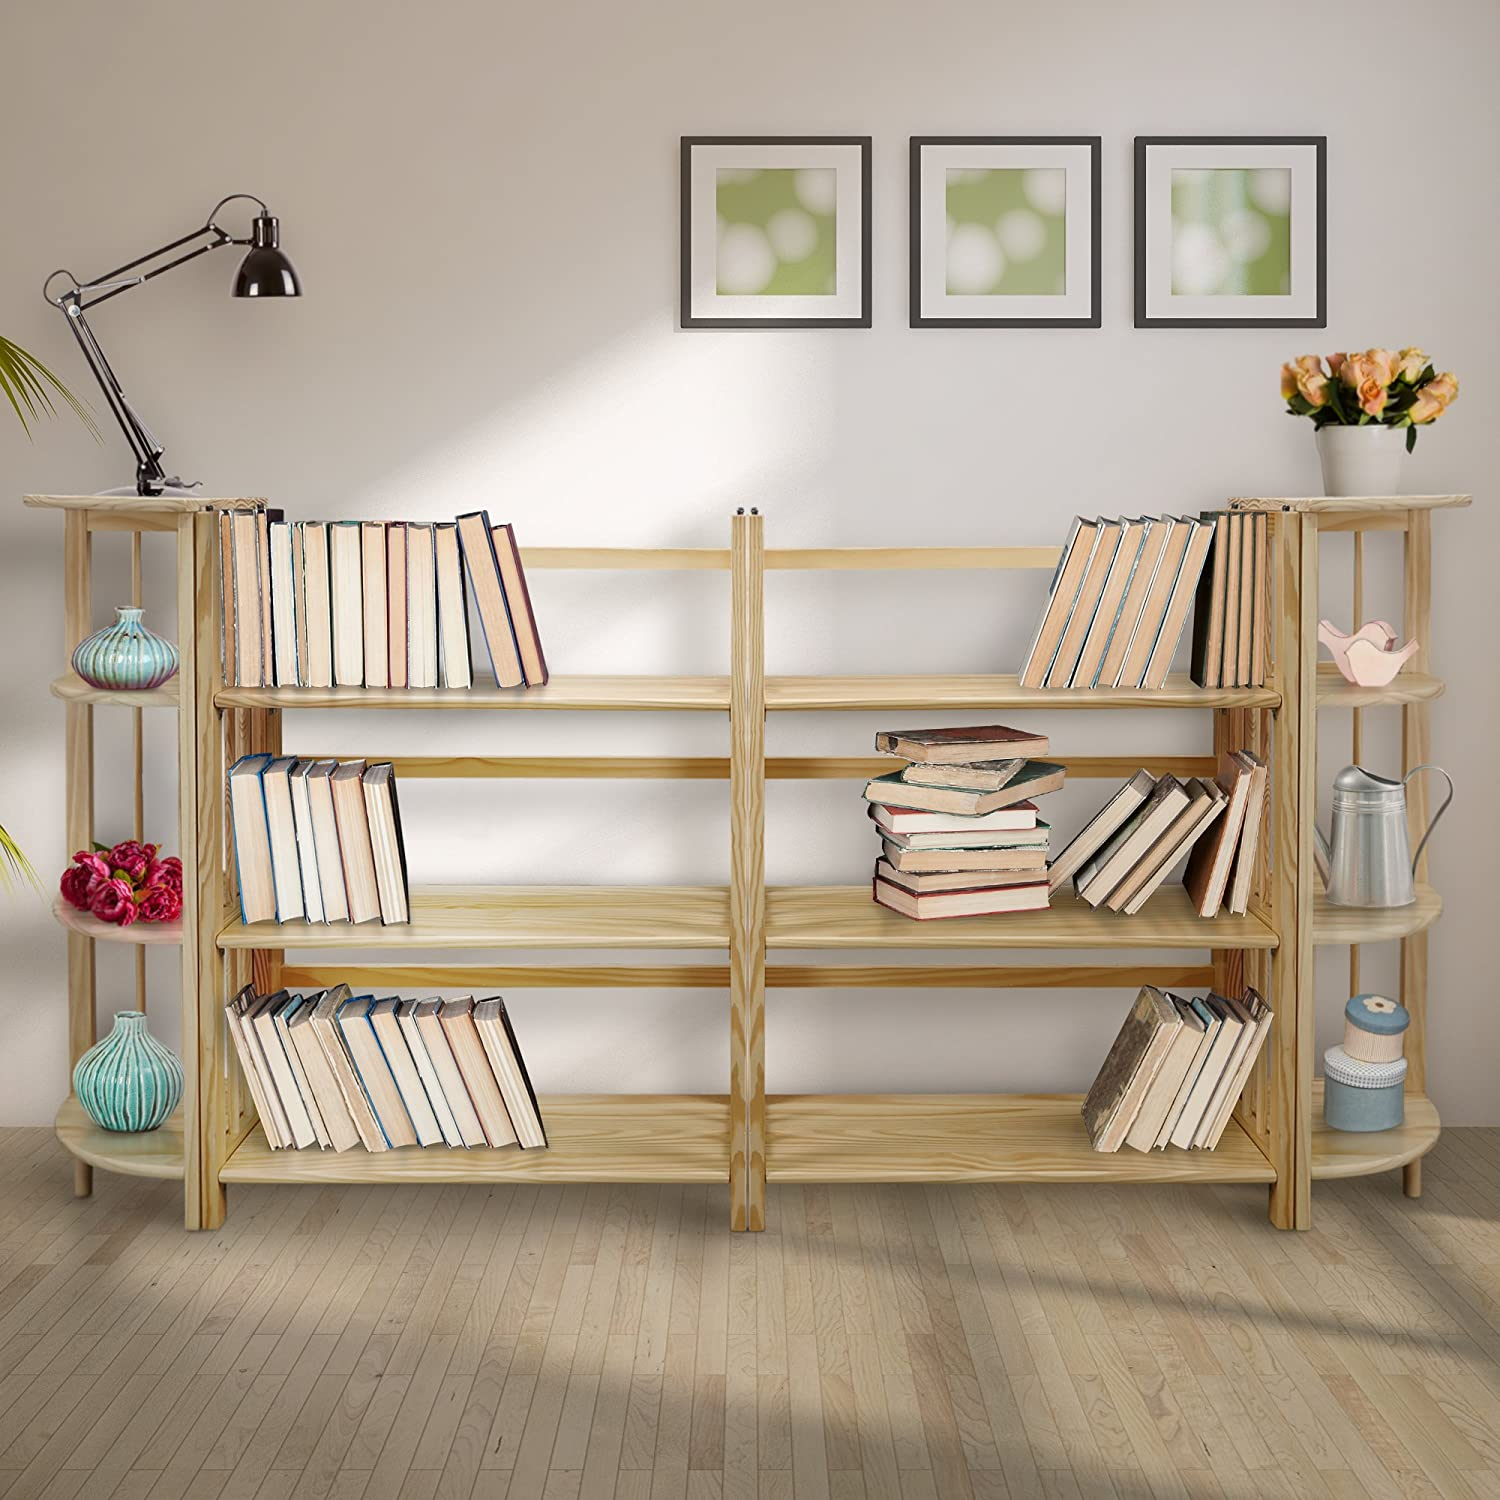 An excellent folding bookcase calls the name of Casual Home 3-Shelf Folding Stackable Bookcase. This one is solid and versatile, combining sturdiness and adaptability. 
